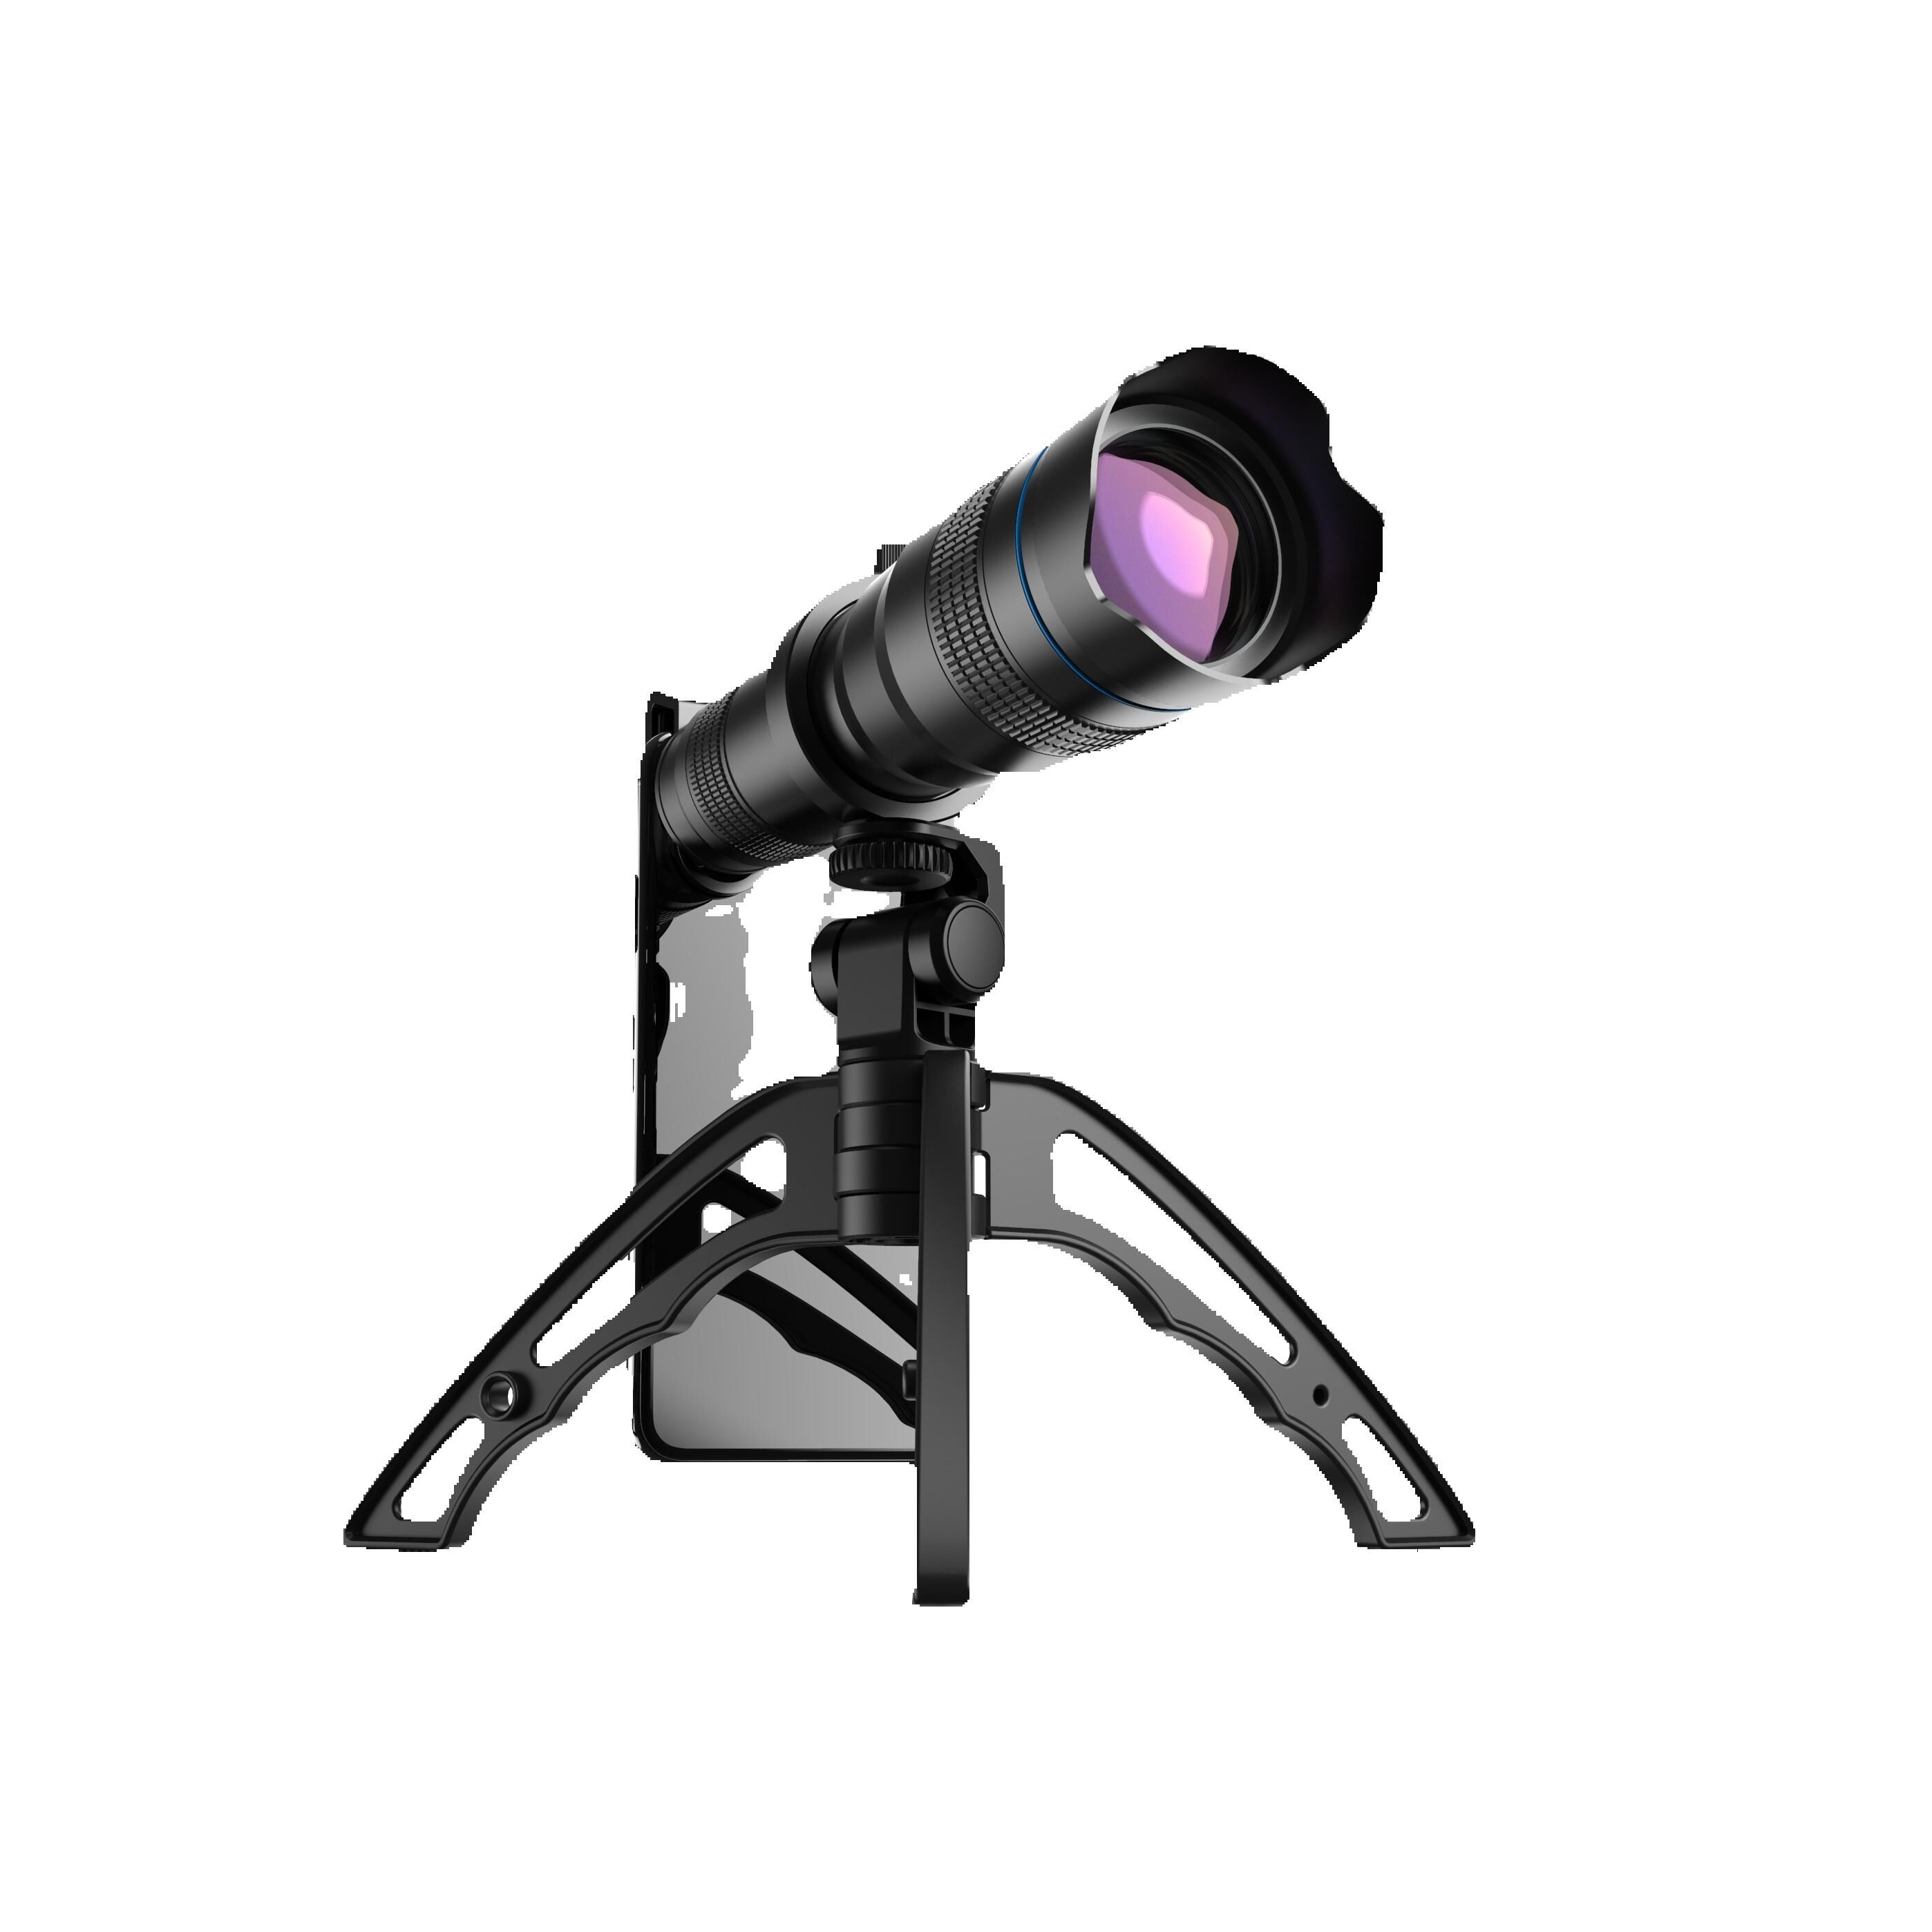 Apexel Hd 36x Telescope Lens Professional Telephoto Zoom Camera Lens With Tripod For Iphone Samsung Smartphones Camping Hunting With Tripod Remote